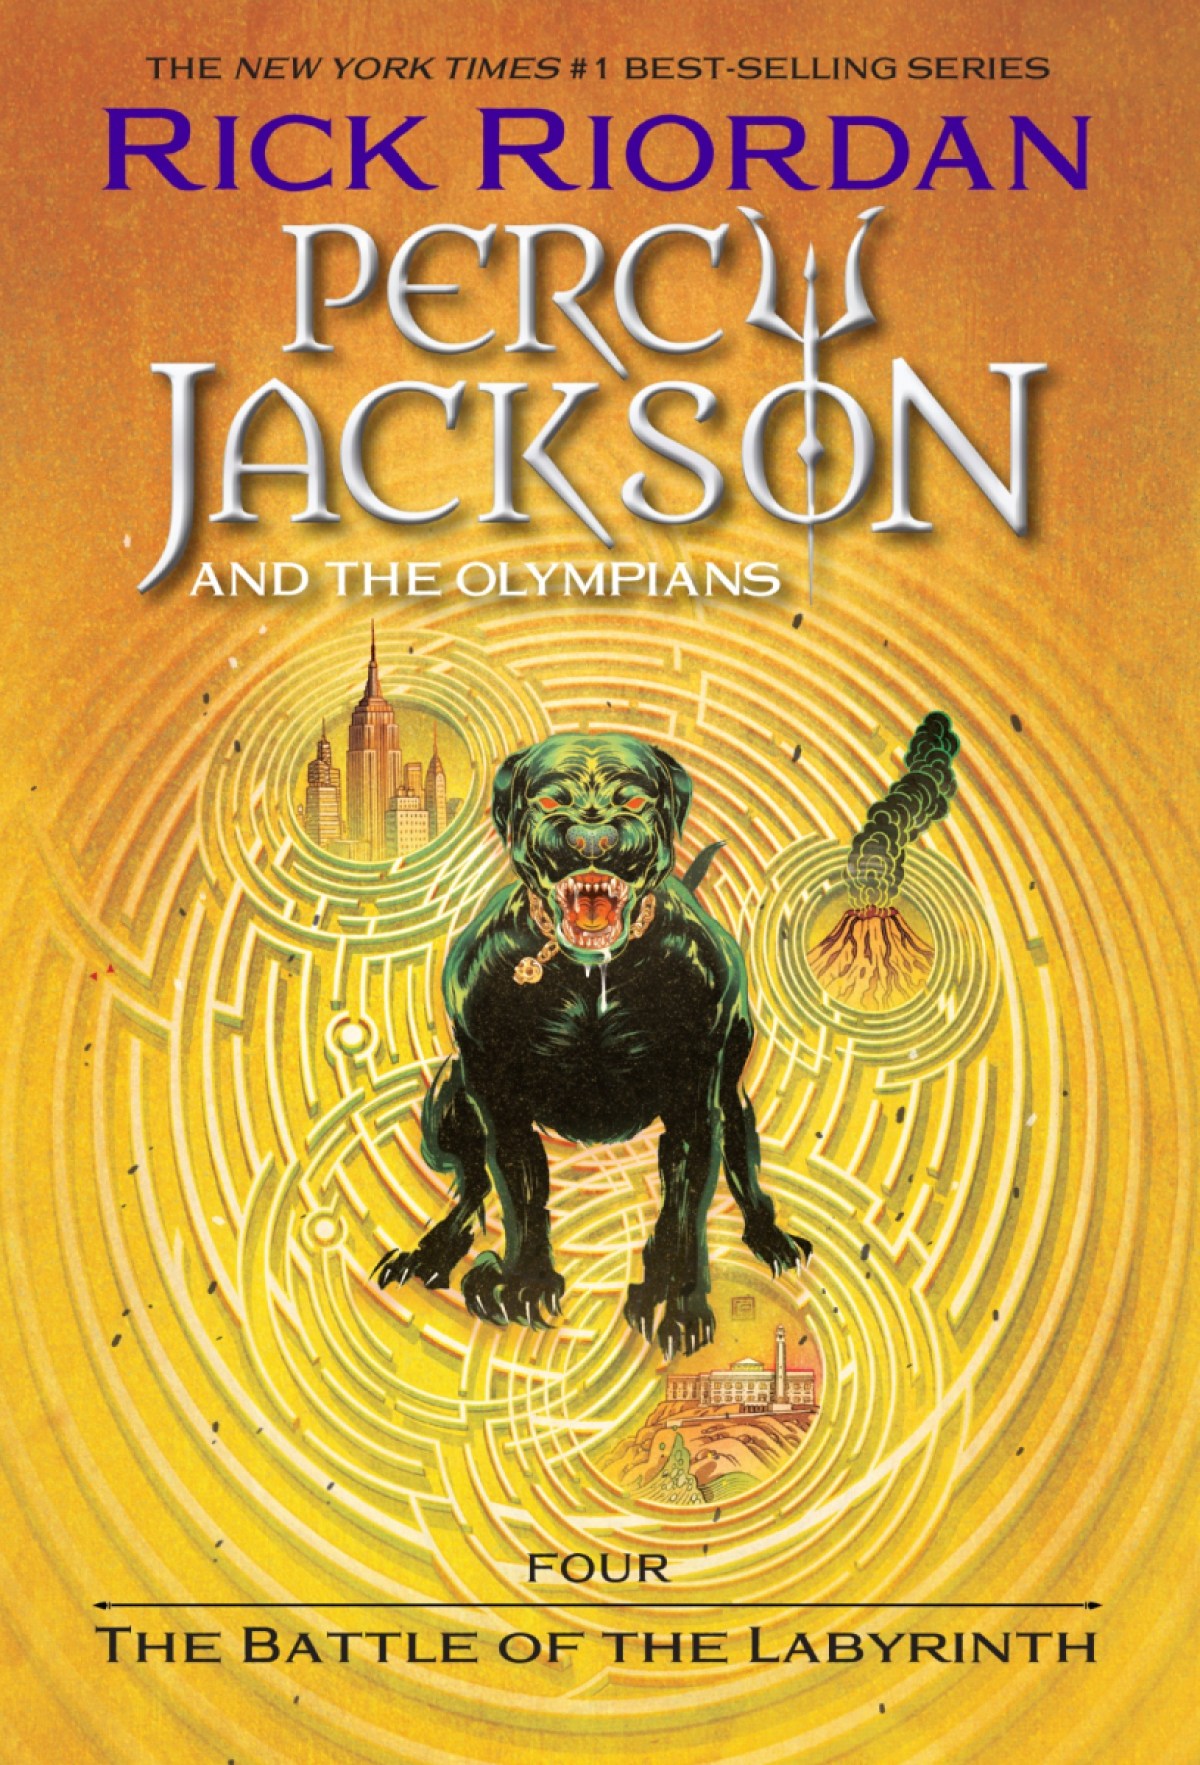 Percy Jackson and the Olympians Book 4 - The Battle of the Labyrinth cover art (Disney Hyperion)